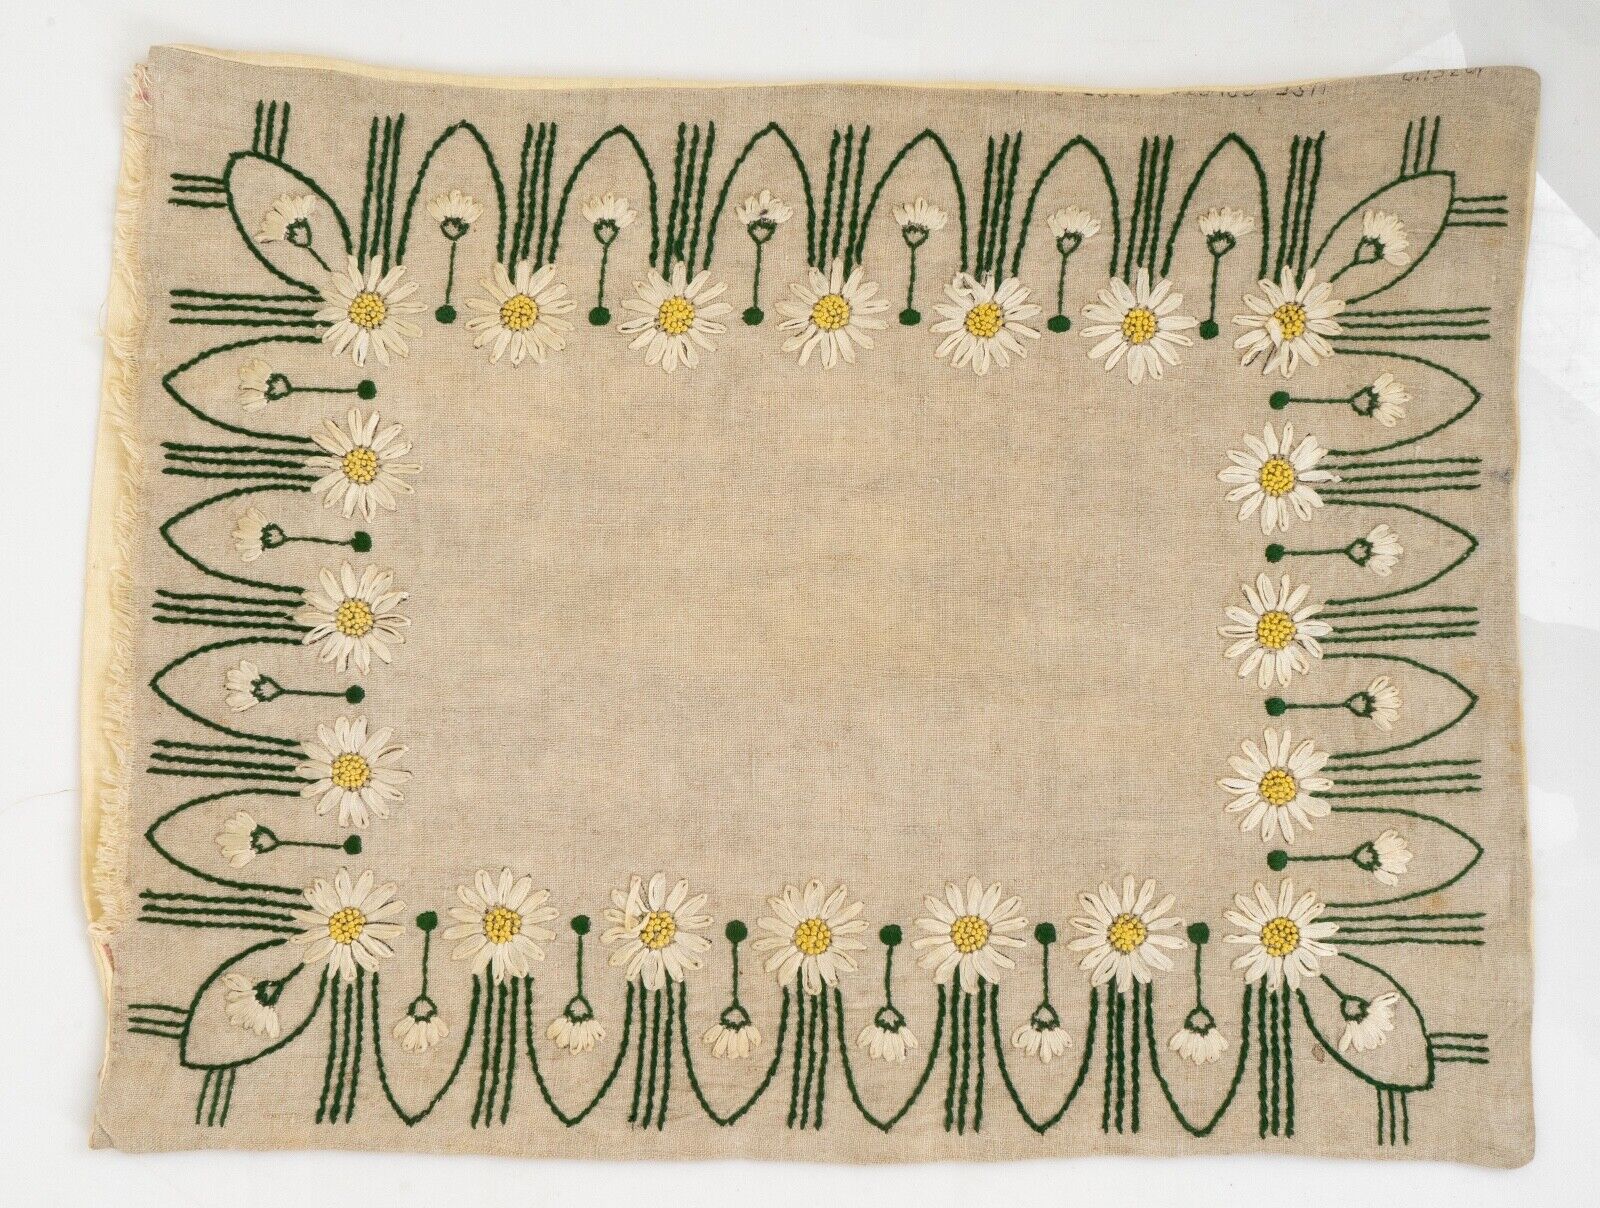 1920s Arts and Crafts Mission Style Linen Embroidered Pillow Case Daisies